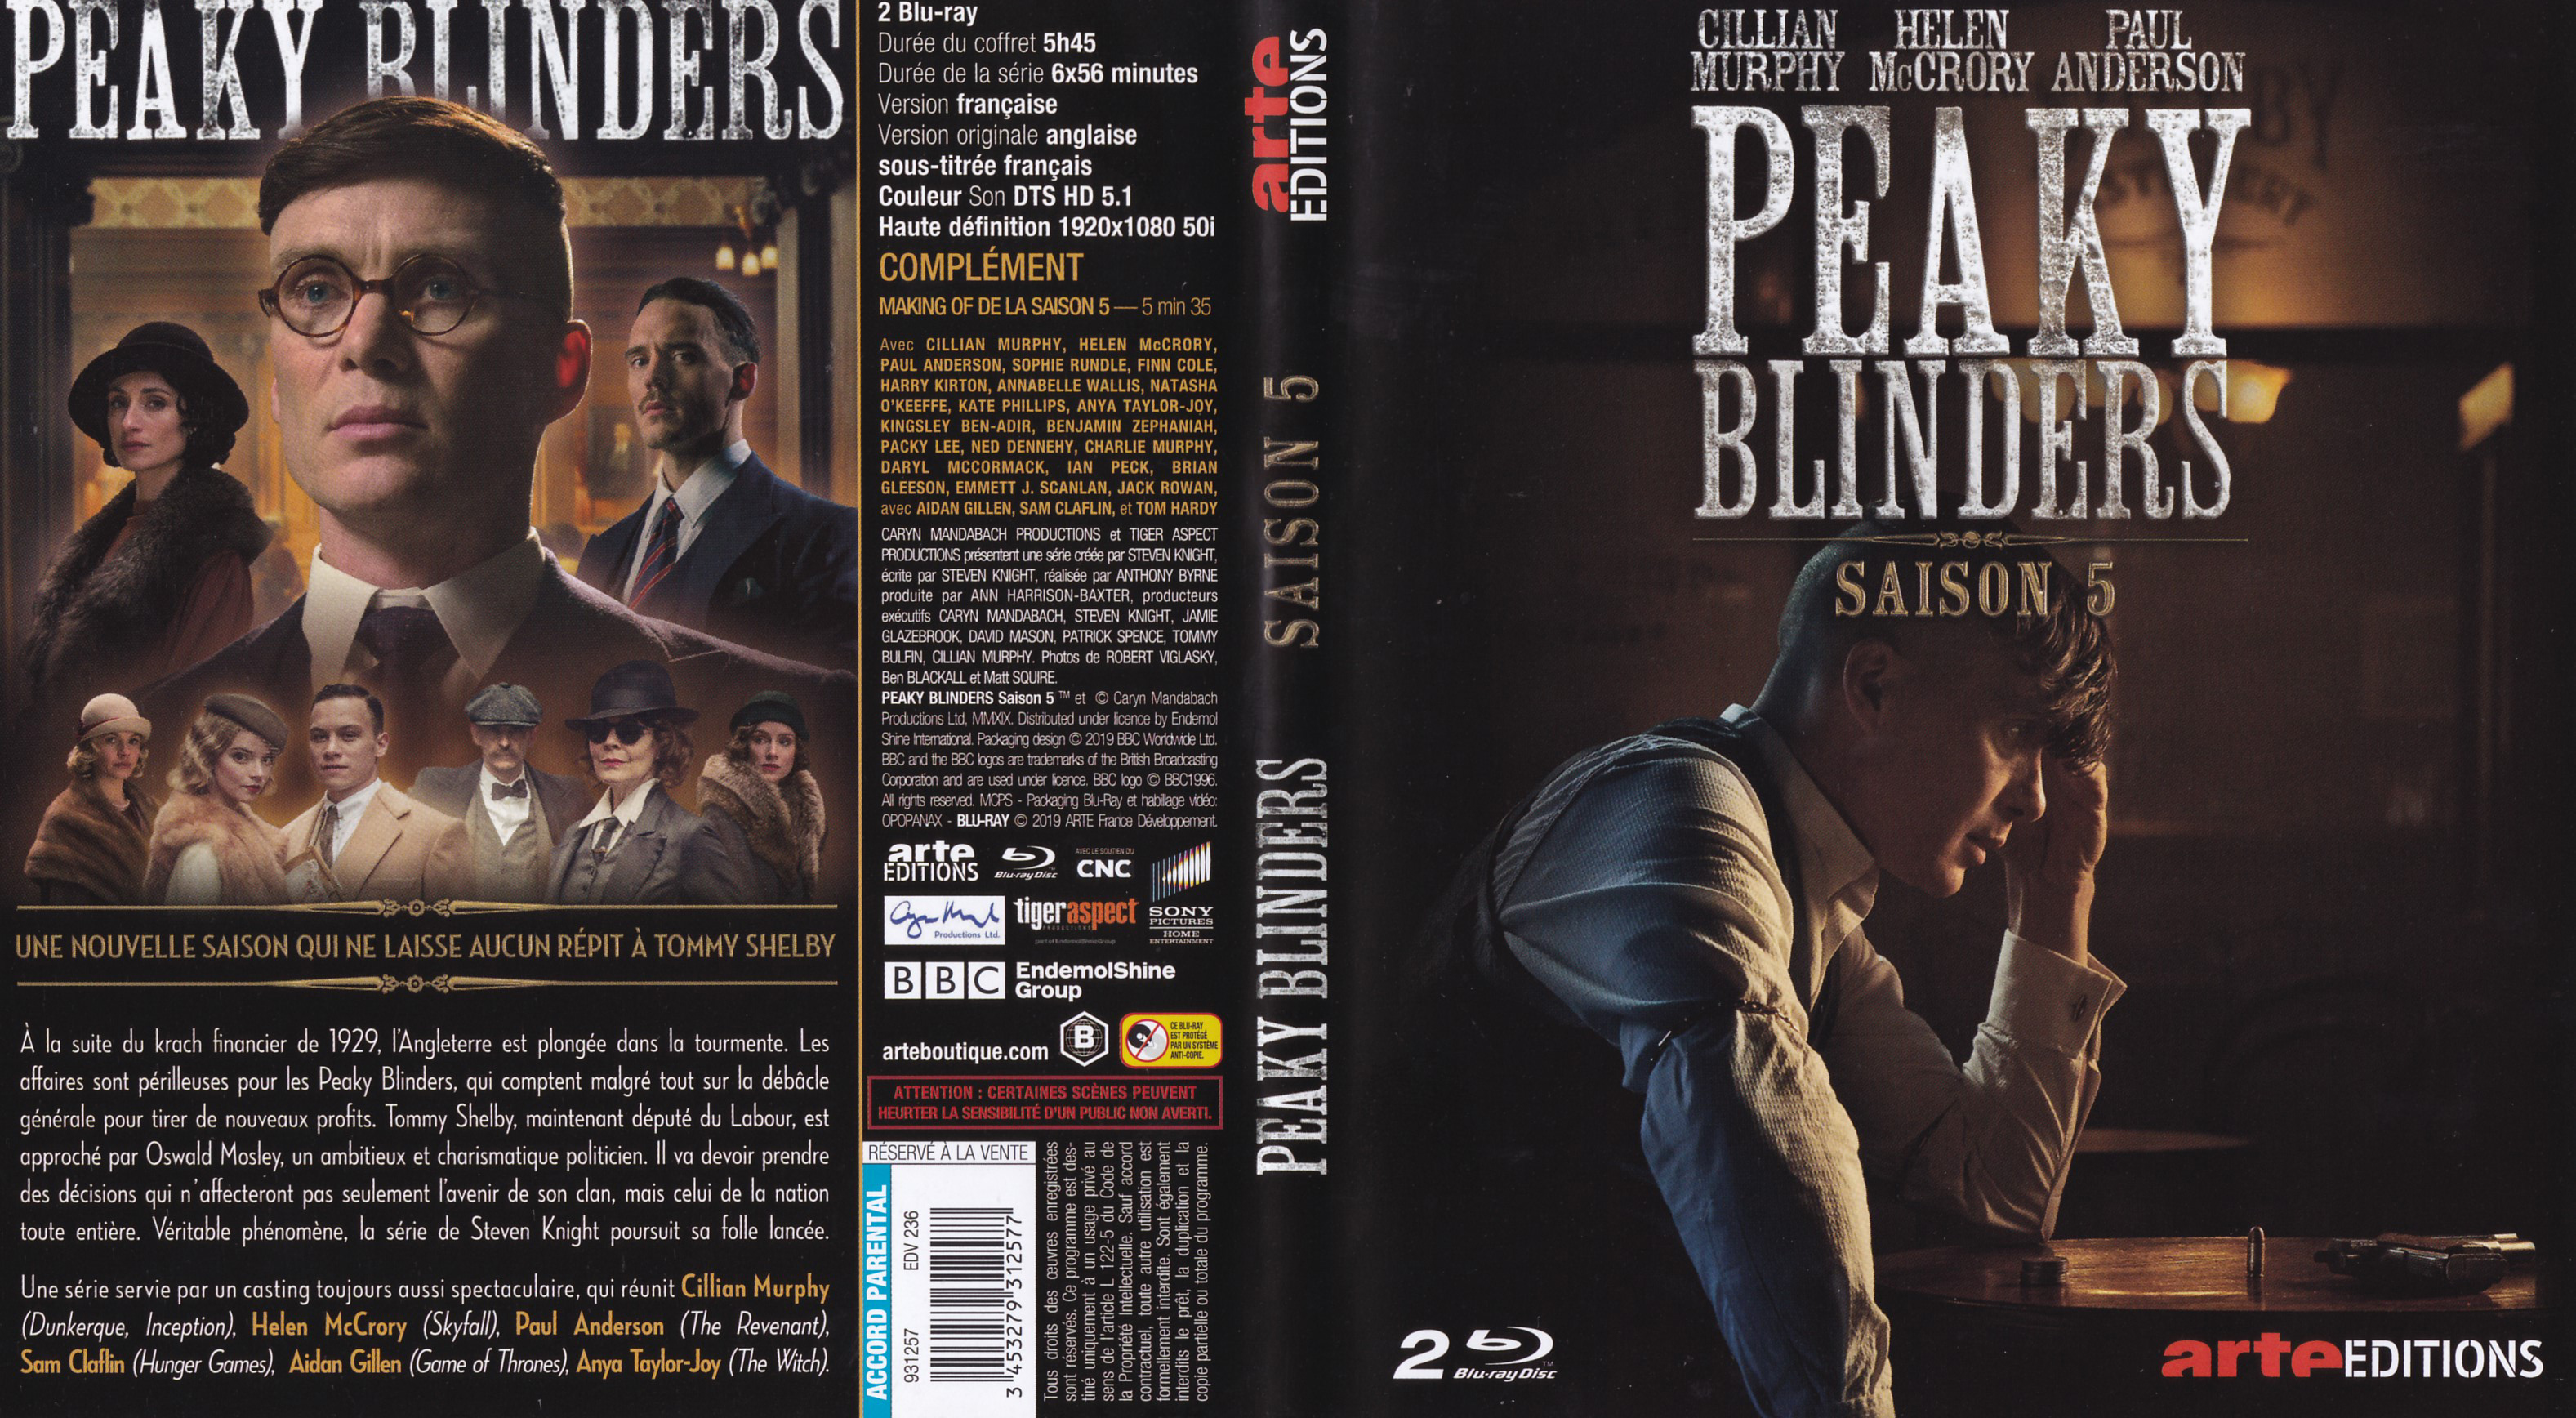 Jaquette DVD Peaky blinders Saison 5 (BLU-RAY)